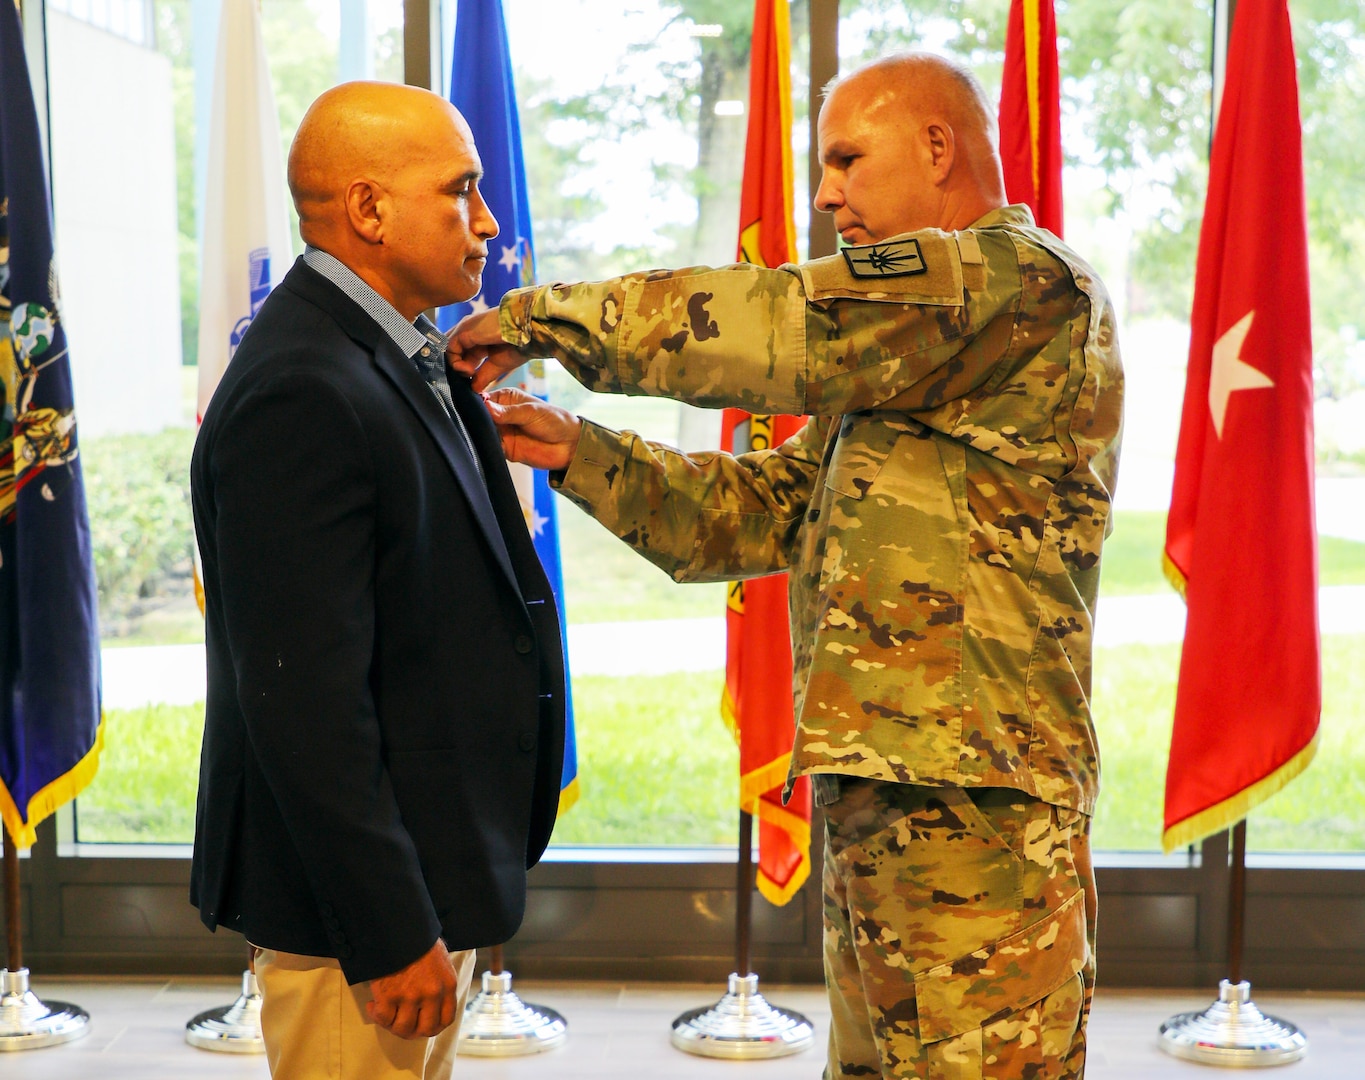 Maj.Gen. Ray Shields, the adjutant general of New York, presents the Bronze Star Medal with “V” device to retired Master Sgt. Luis Barsallo during a ceremony at the New York Division of Military and Naval Affairs headquarters in Latham, New York, June 27, 2024.  Barsallo was recognized for heroism during  combat in Samarra, Iraq, in April and May 2004 in support of Operation Iraqi Freedom.